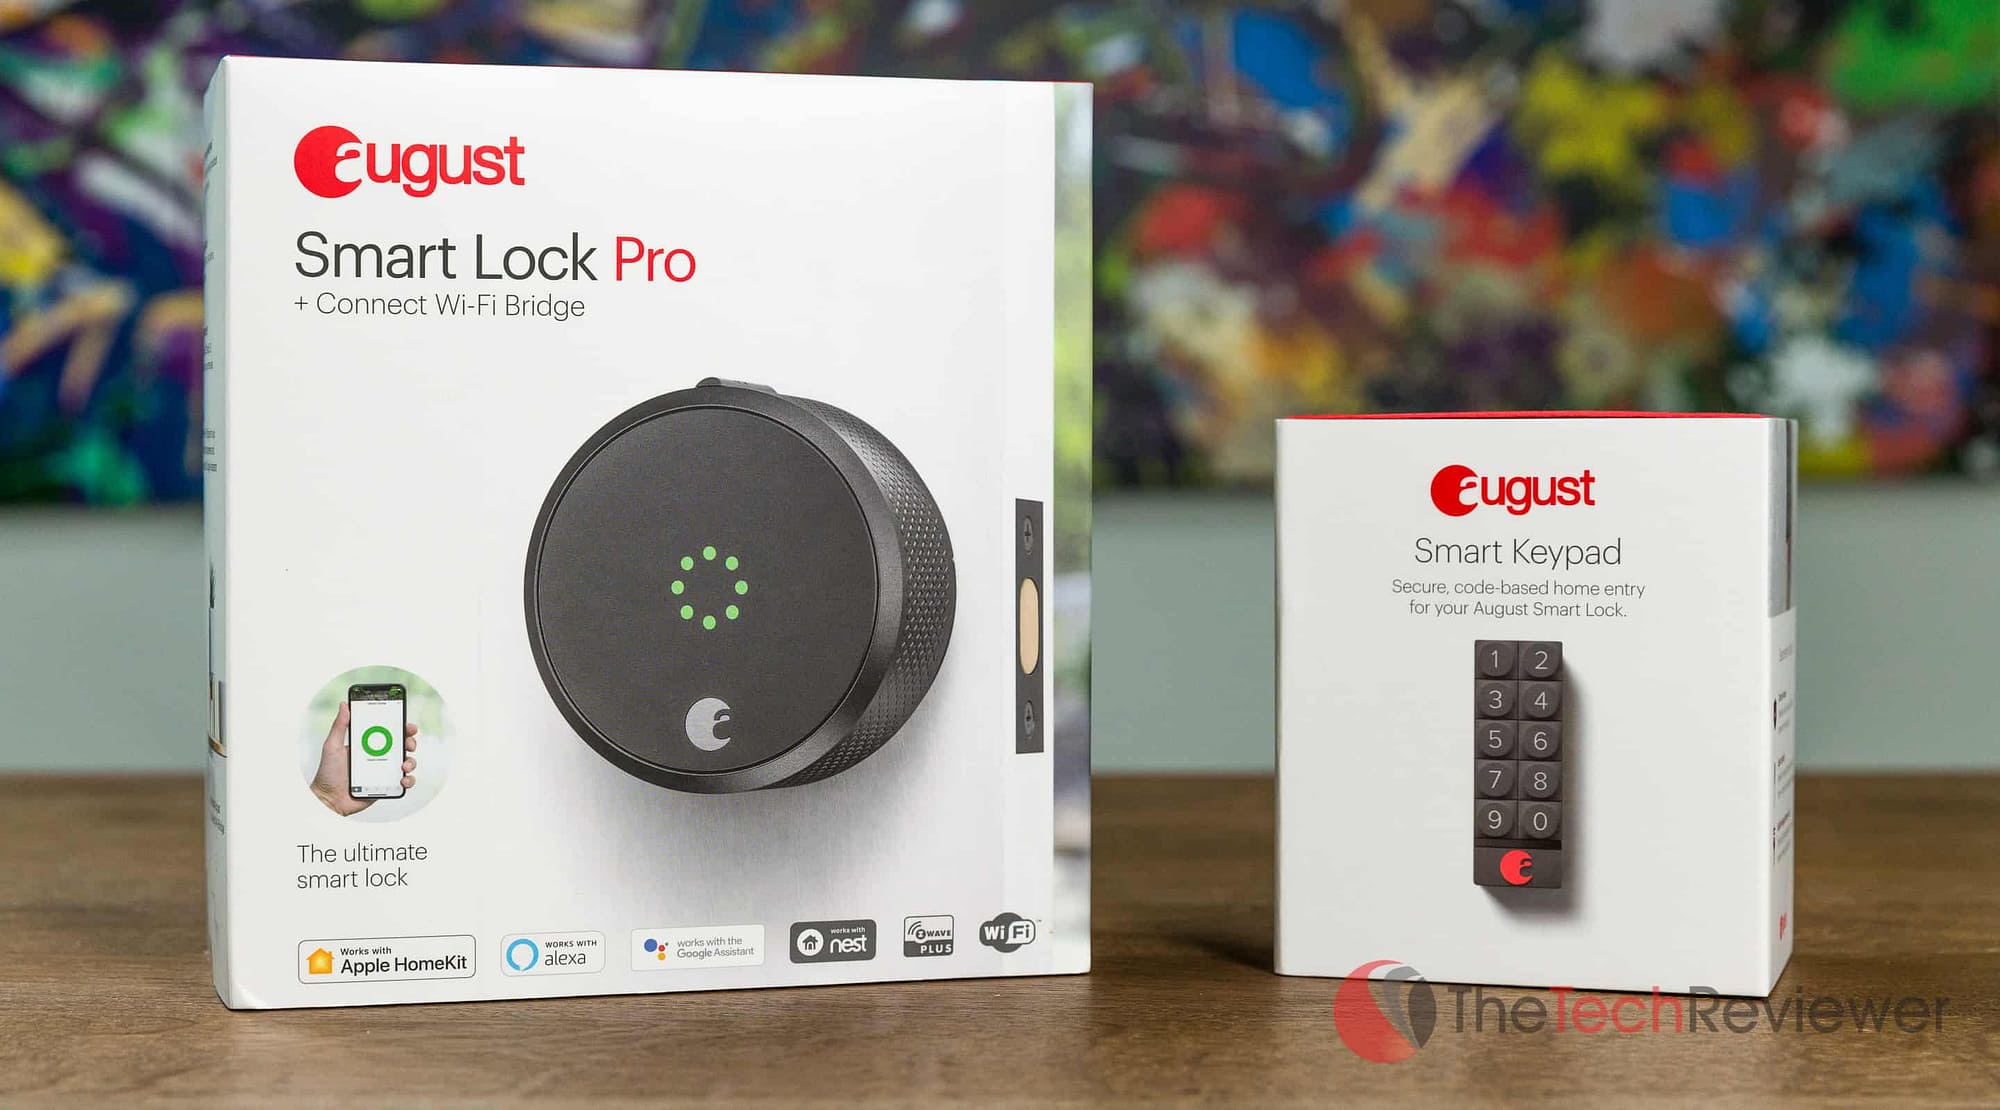 August Smart Lock Pro and Smart Keyboard Boxes